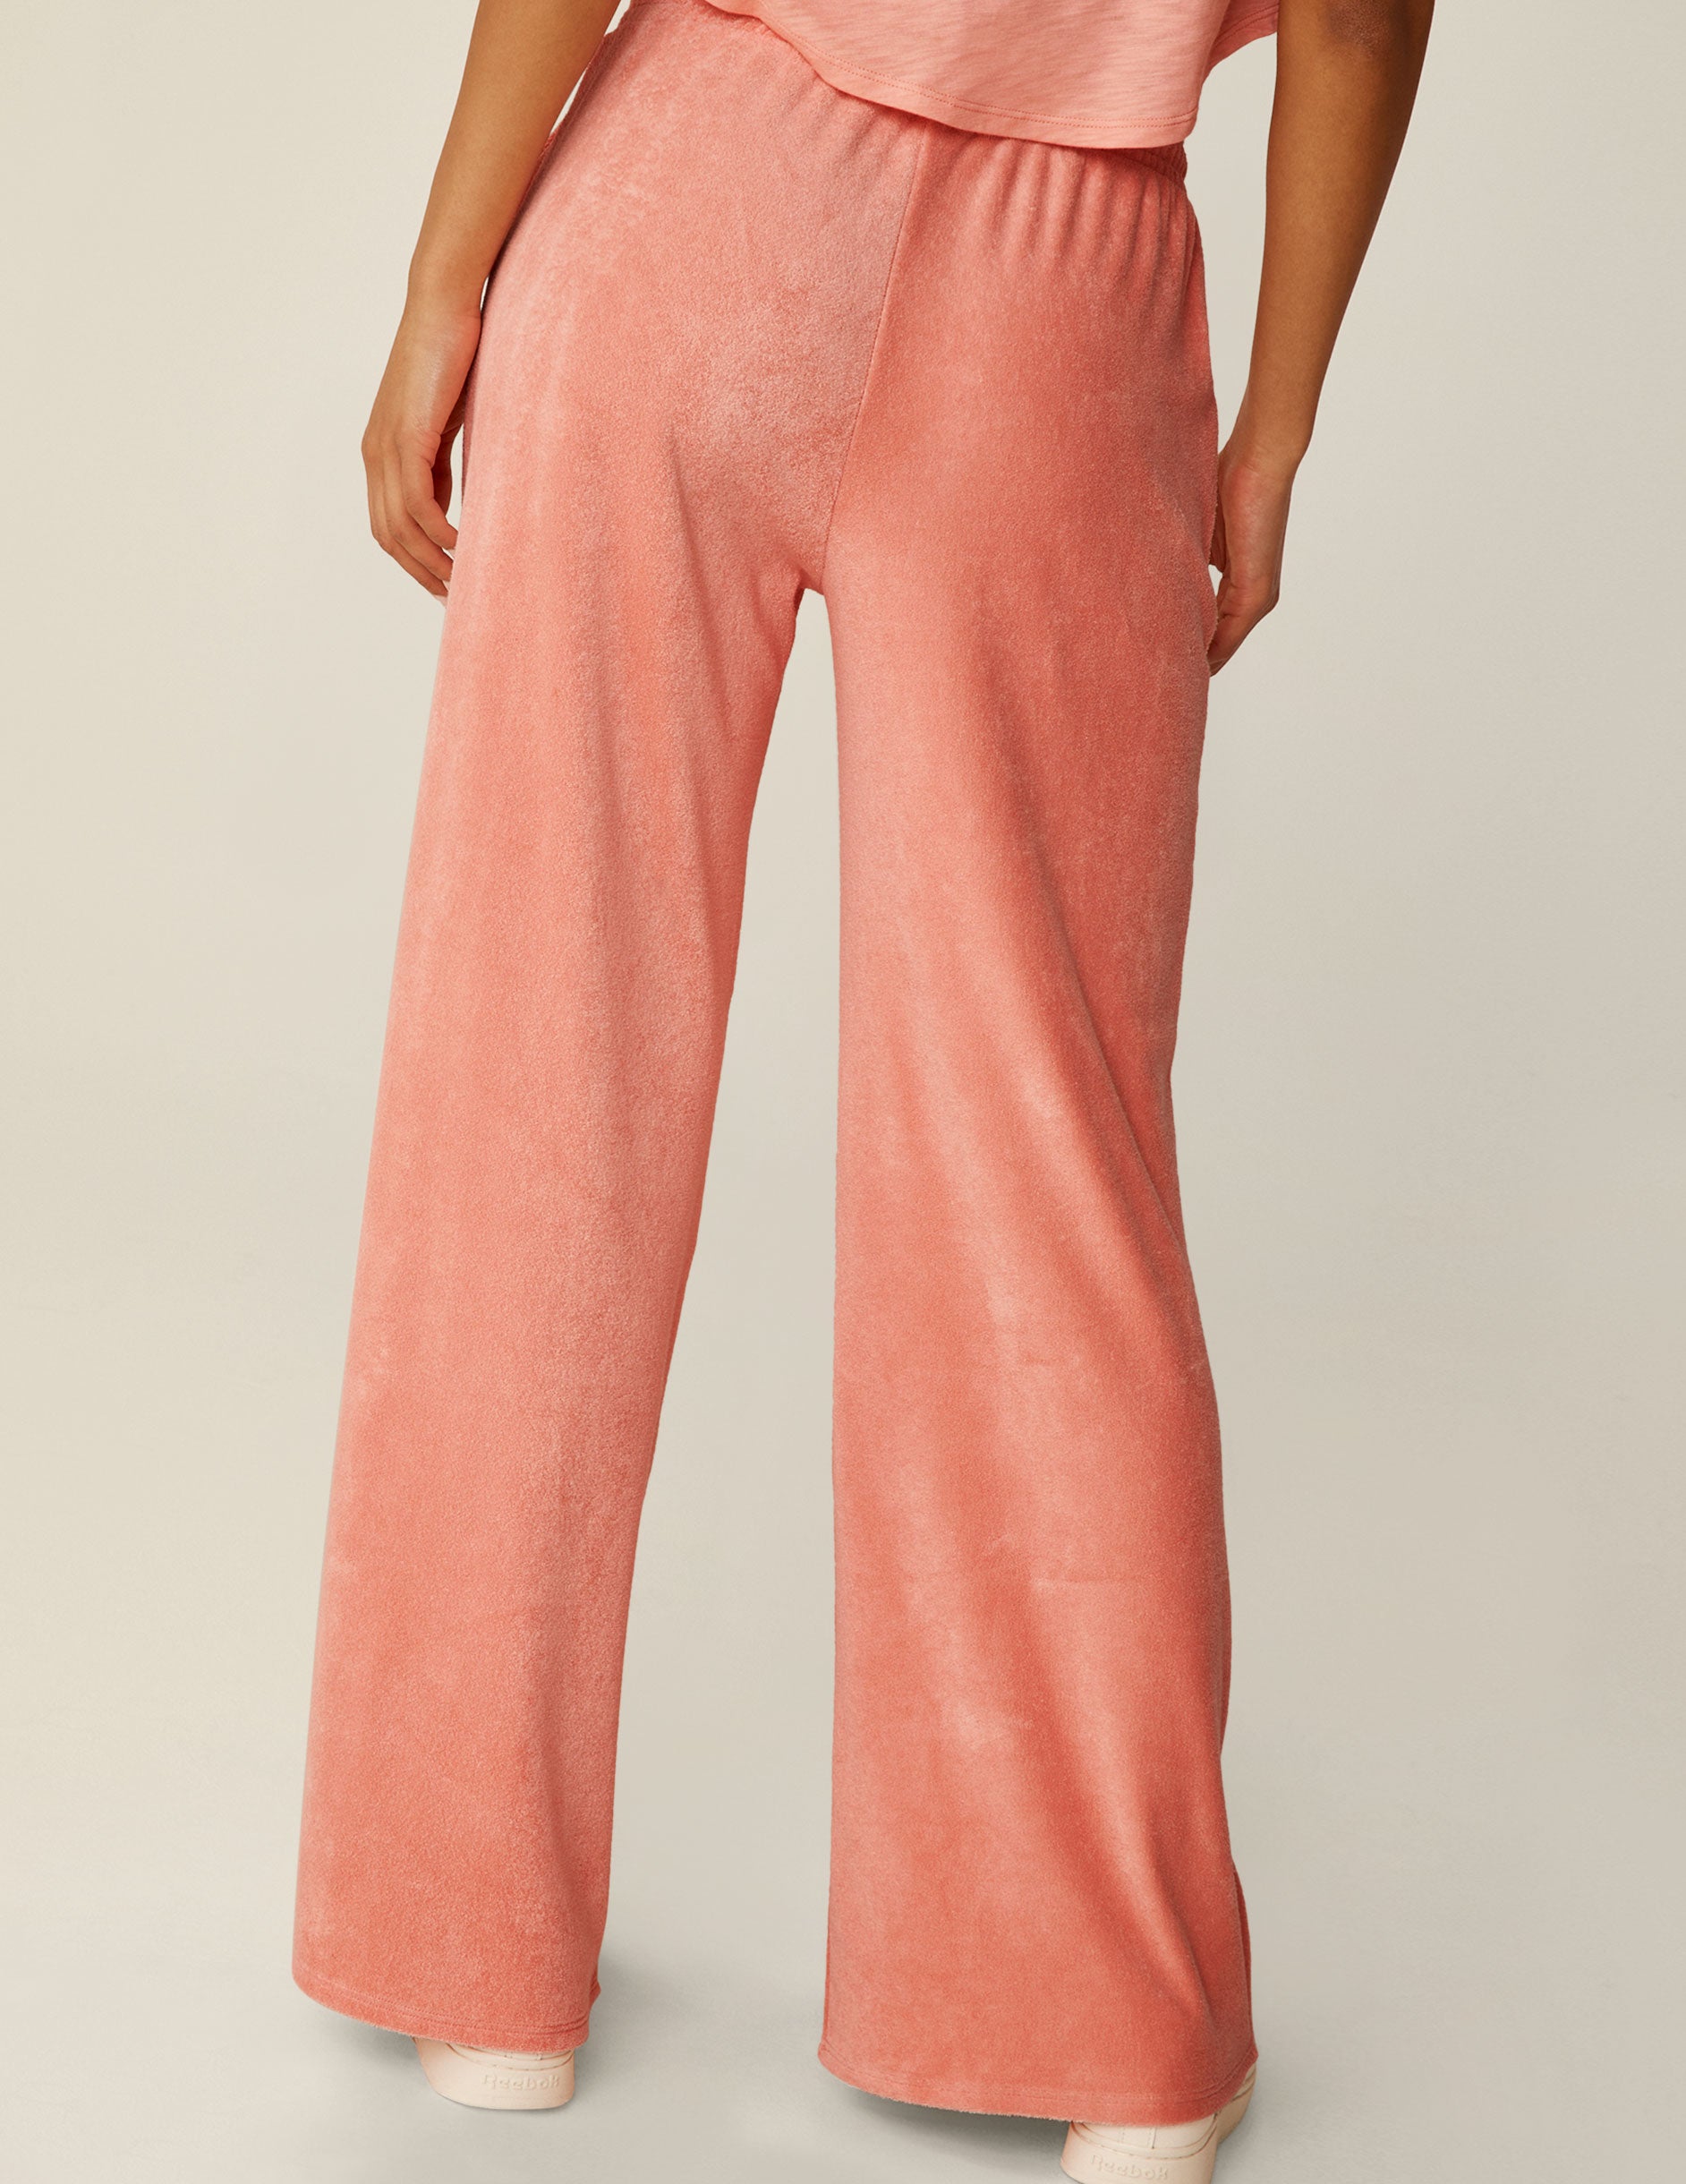 pink terry fabric pants with a drawstring at waistband.